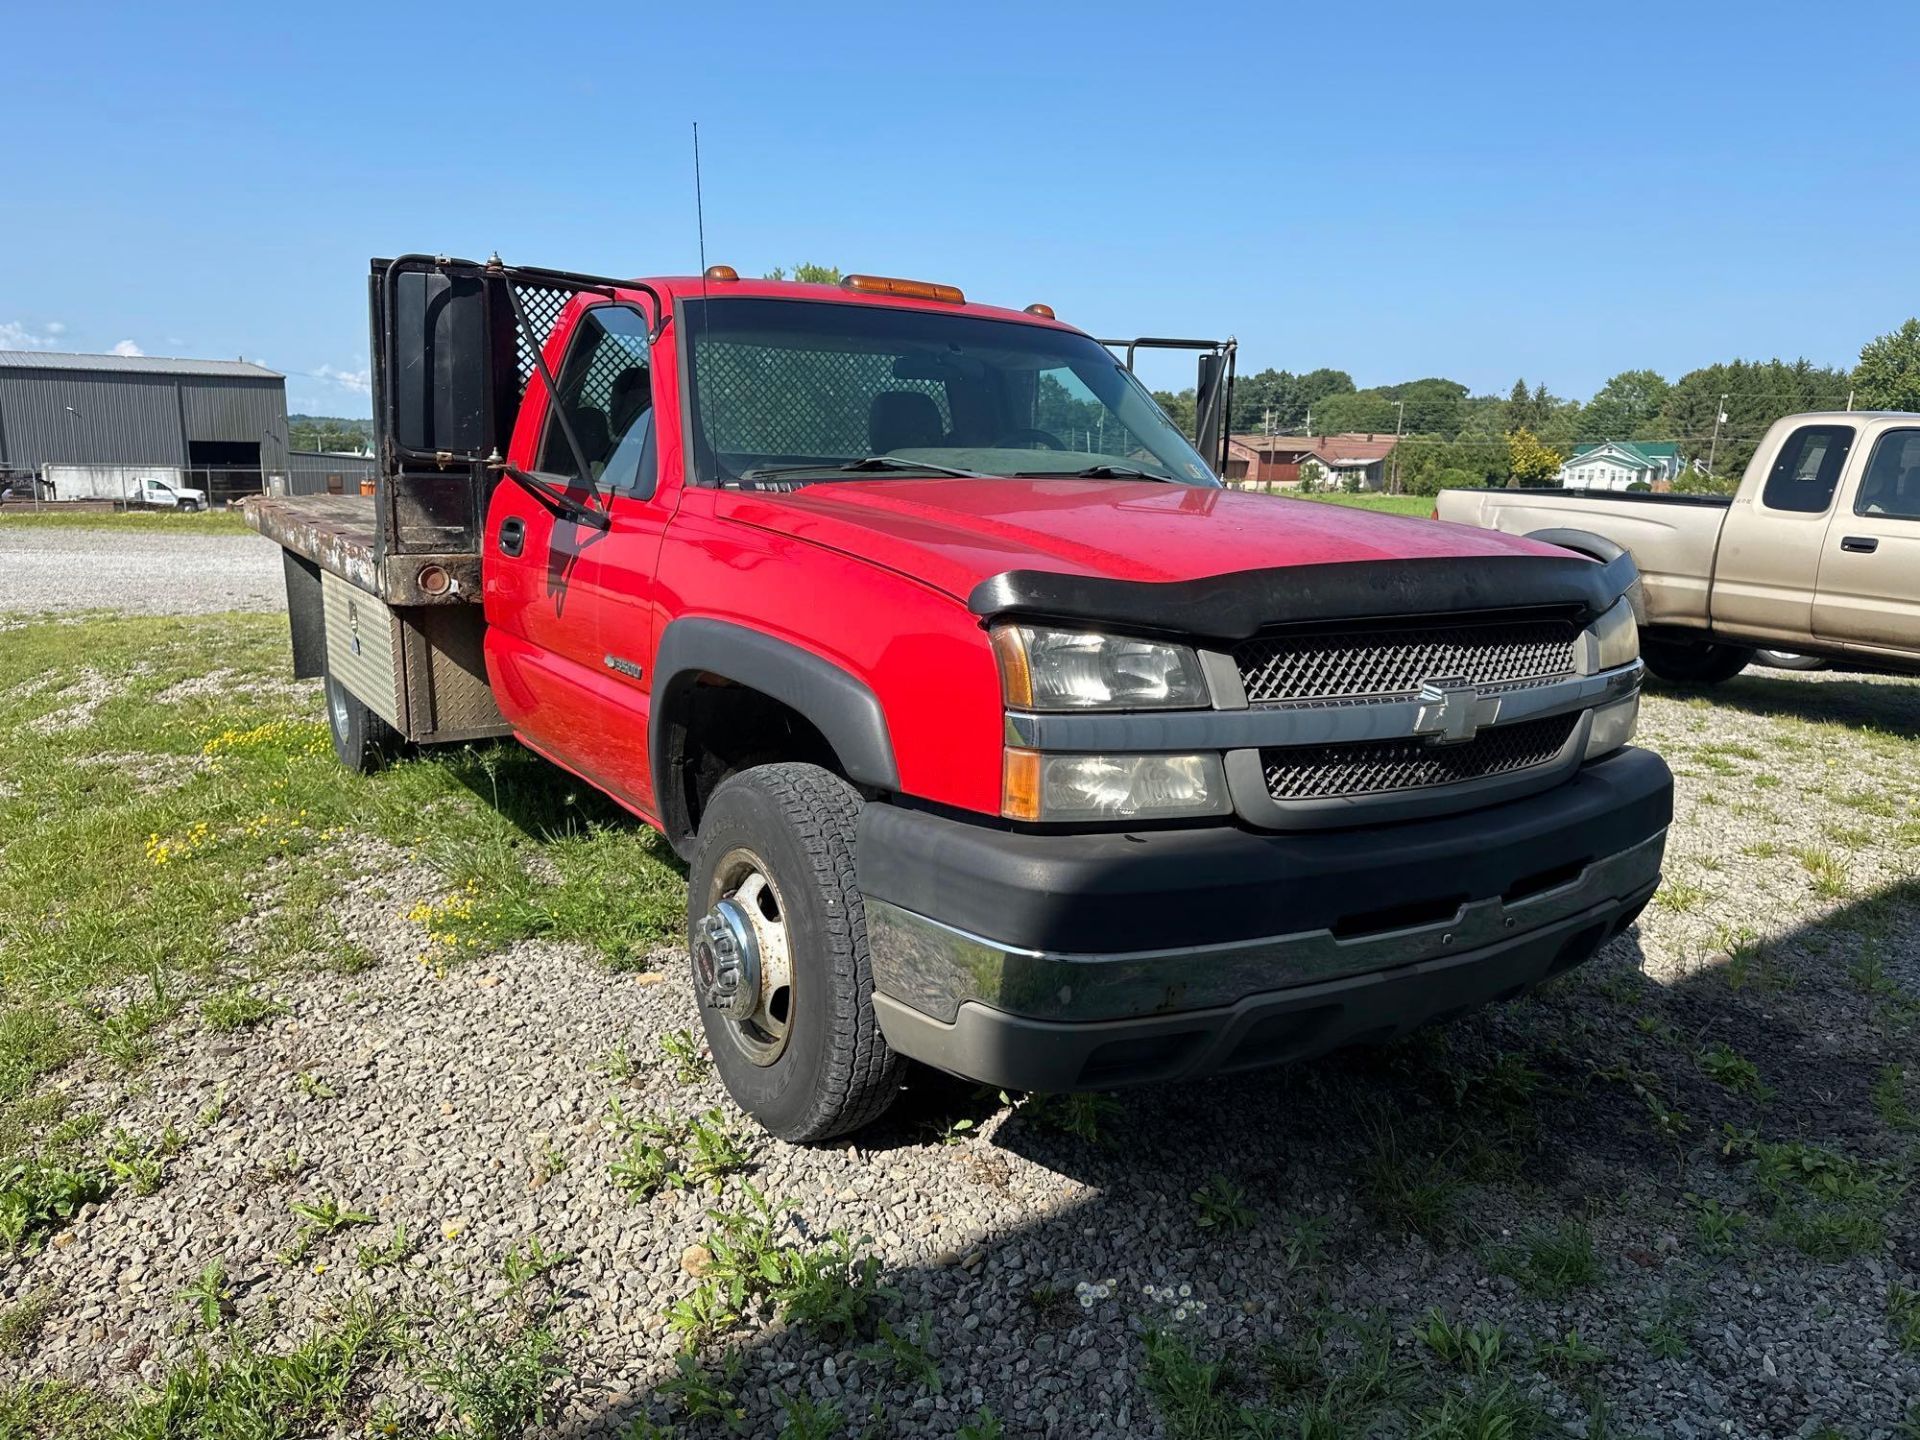 2003 Chevy Silverado 3500 12” Flatbed Truck, 138098mi w/ Toolbox and Flatbed Sides - Image 2 of 10